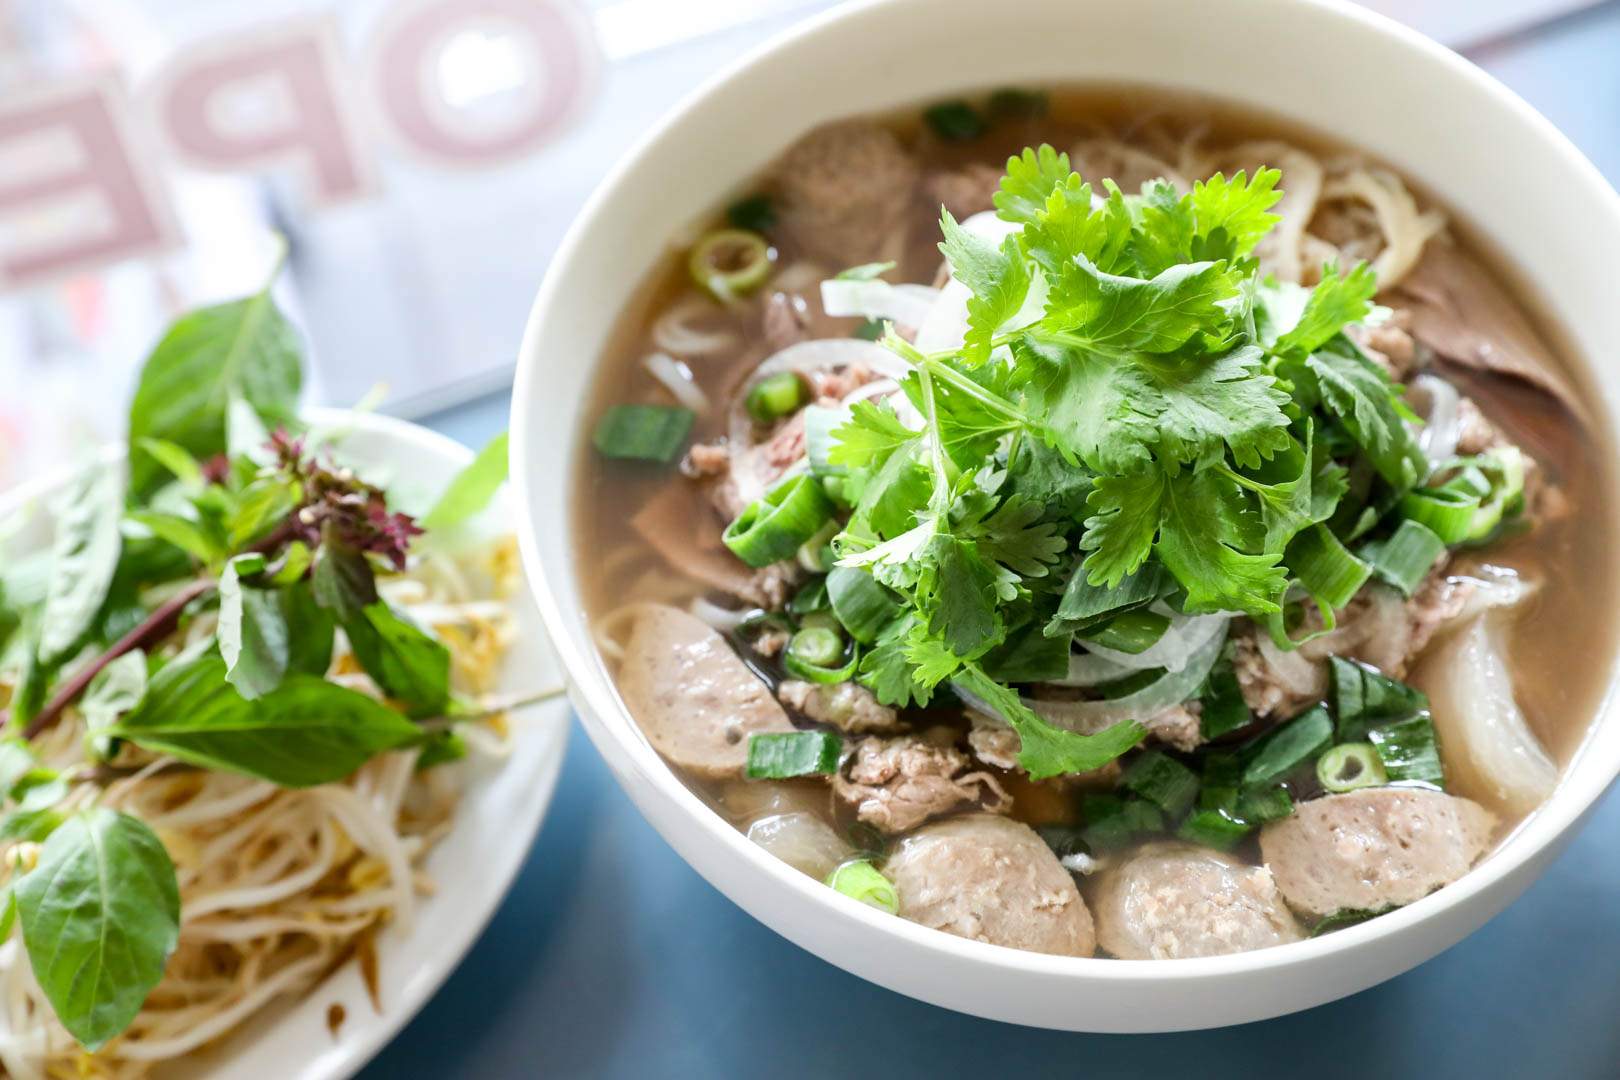 Where to Find the Best Pho in Sydney